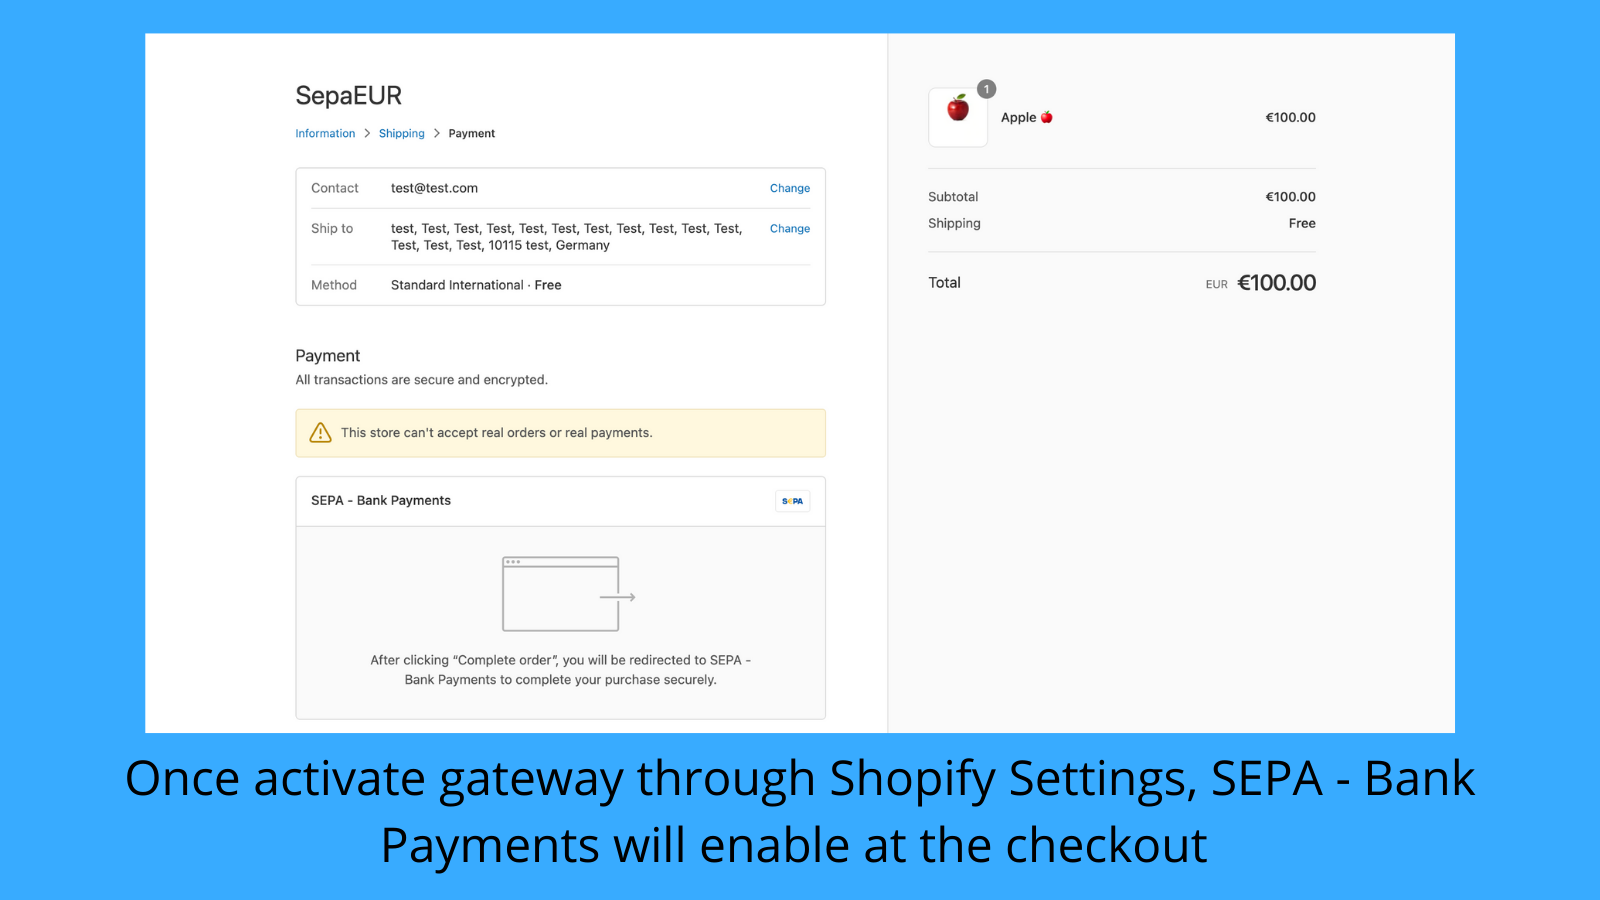 Enable SEPA - Bank Payments at the checkout. 